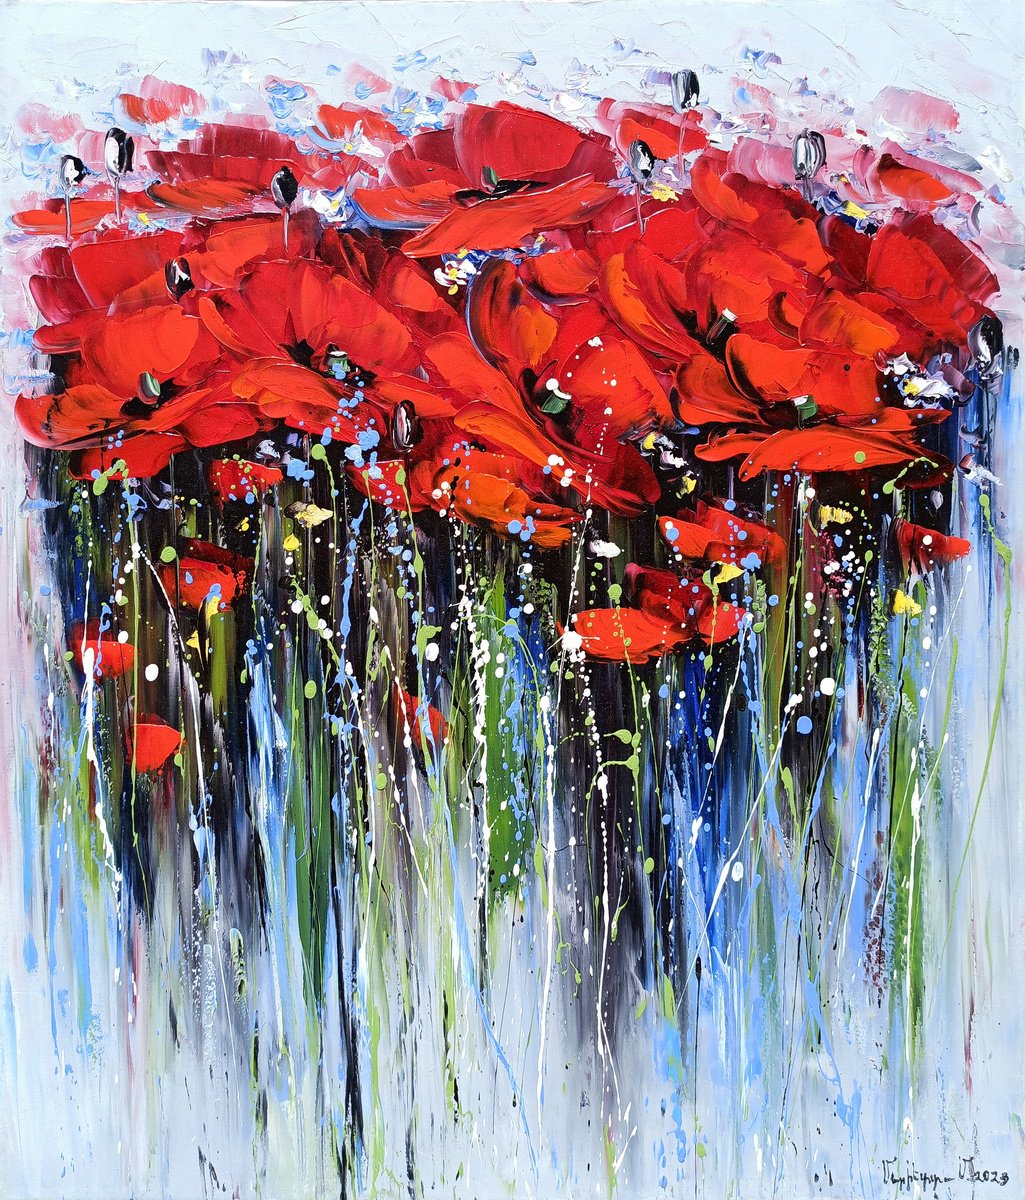 Abstract red poppies by Marieta Martirosyan